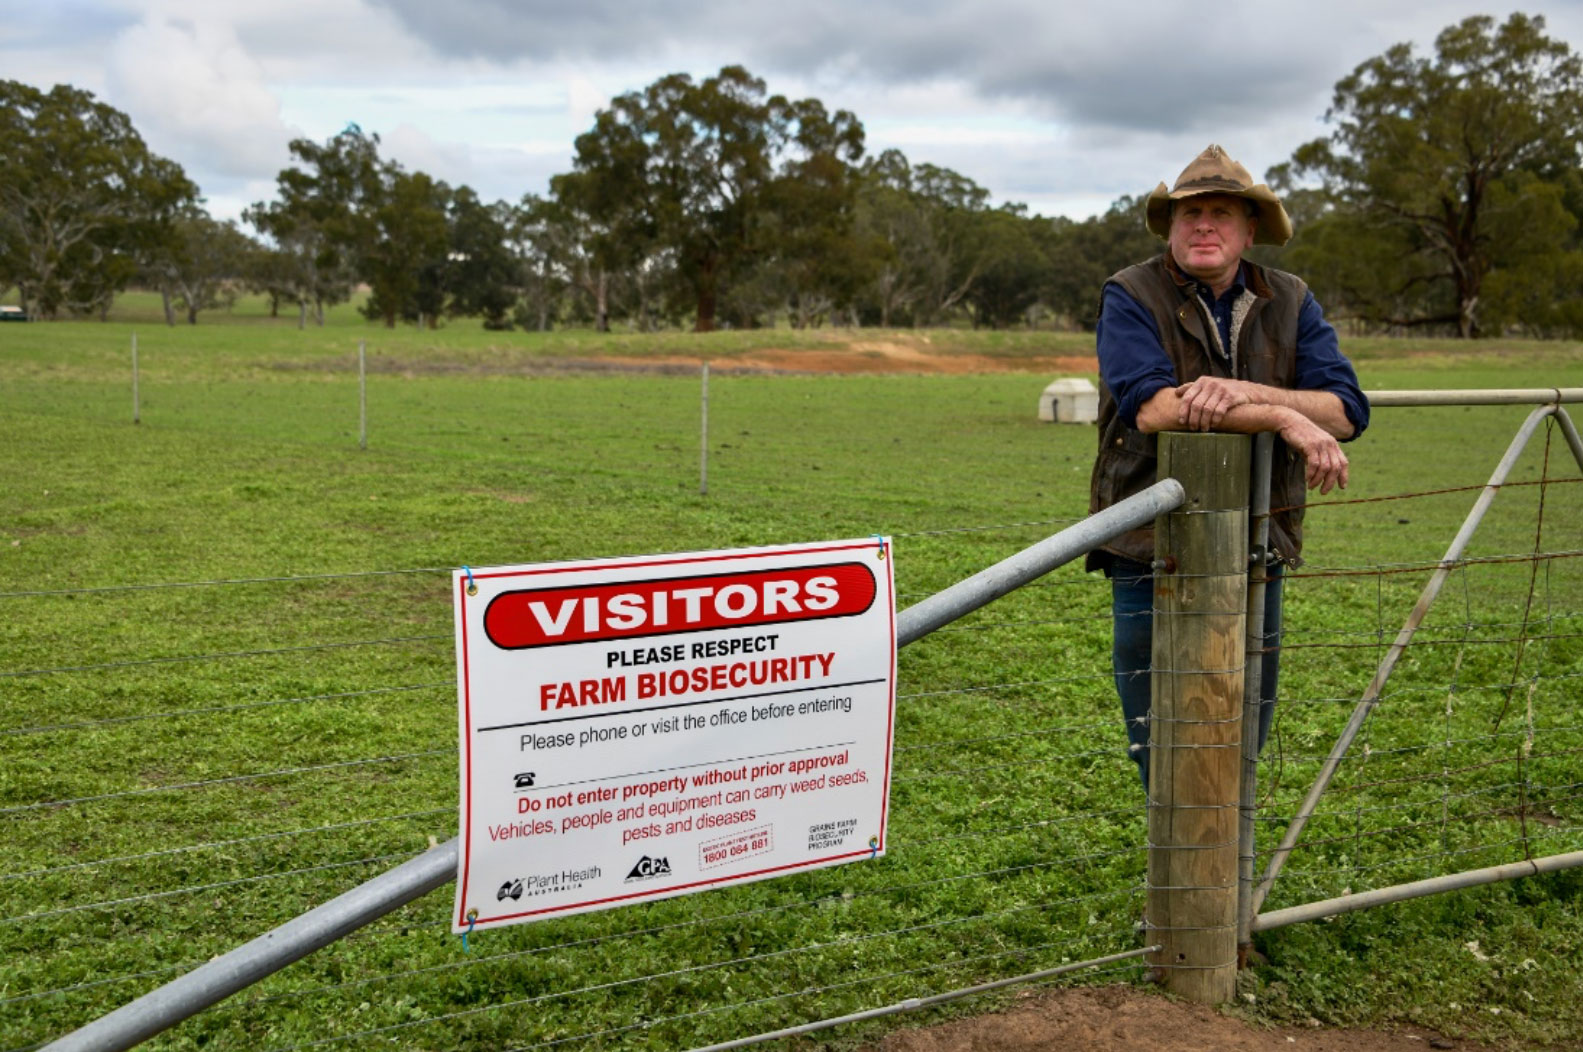 Farmer leaning on cattle gate next to sign which says 'Visitors, please respect Farm Biosecurity. Please phone or visit the office before entering. Do not enter property without prior approval. Vehicles, people and equipment can carry weed seeds, pests and diseases.